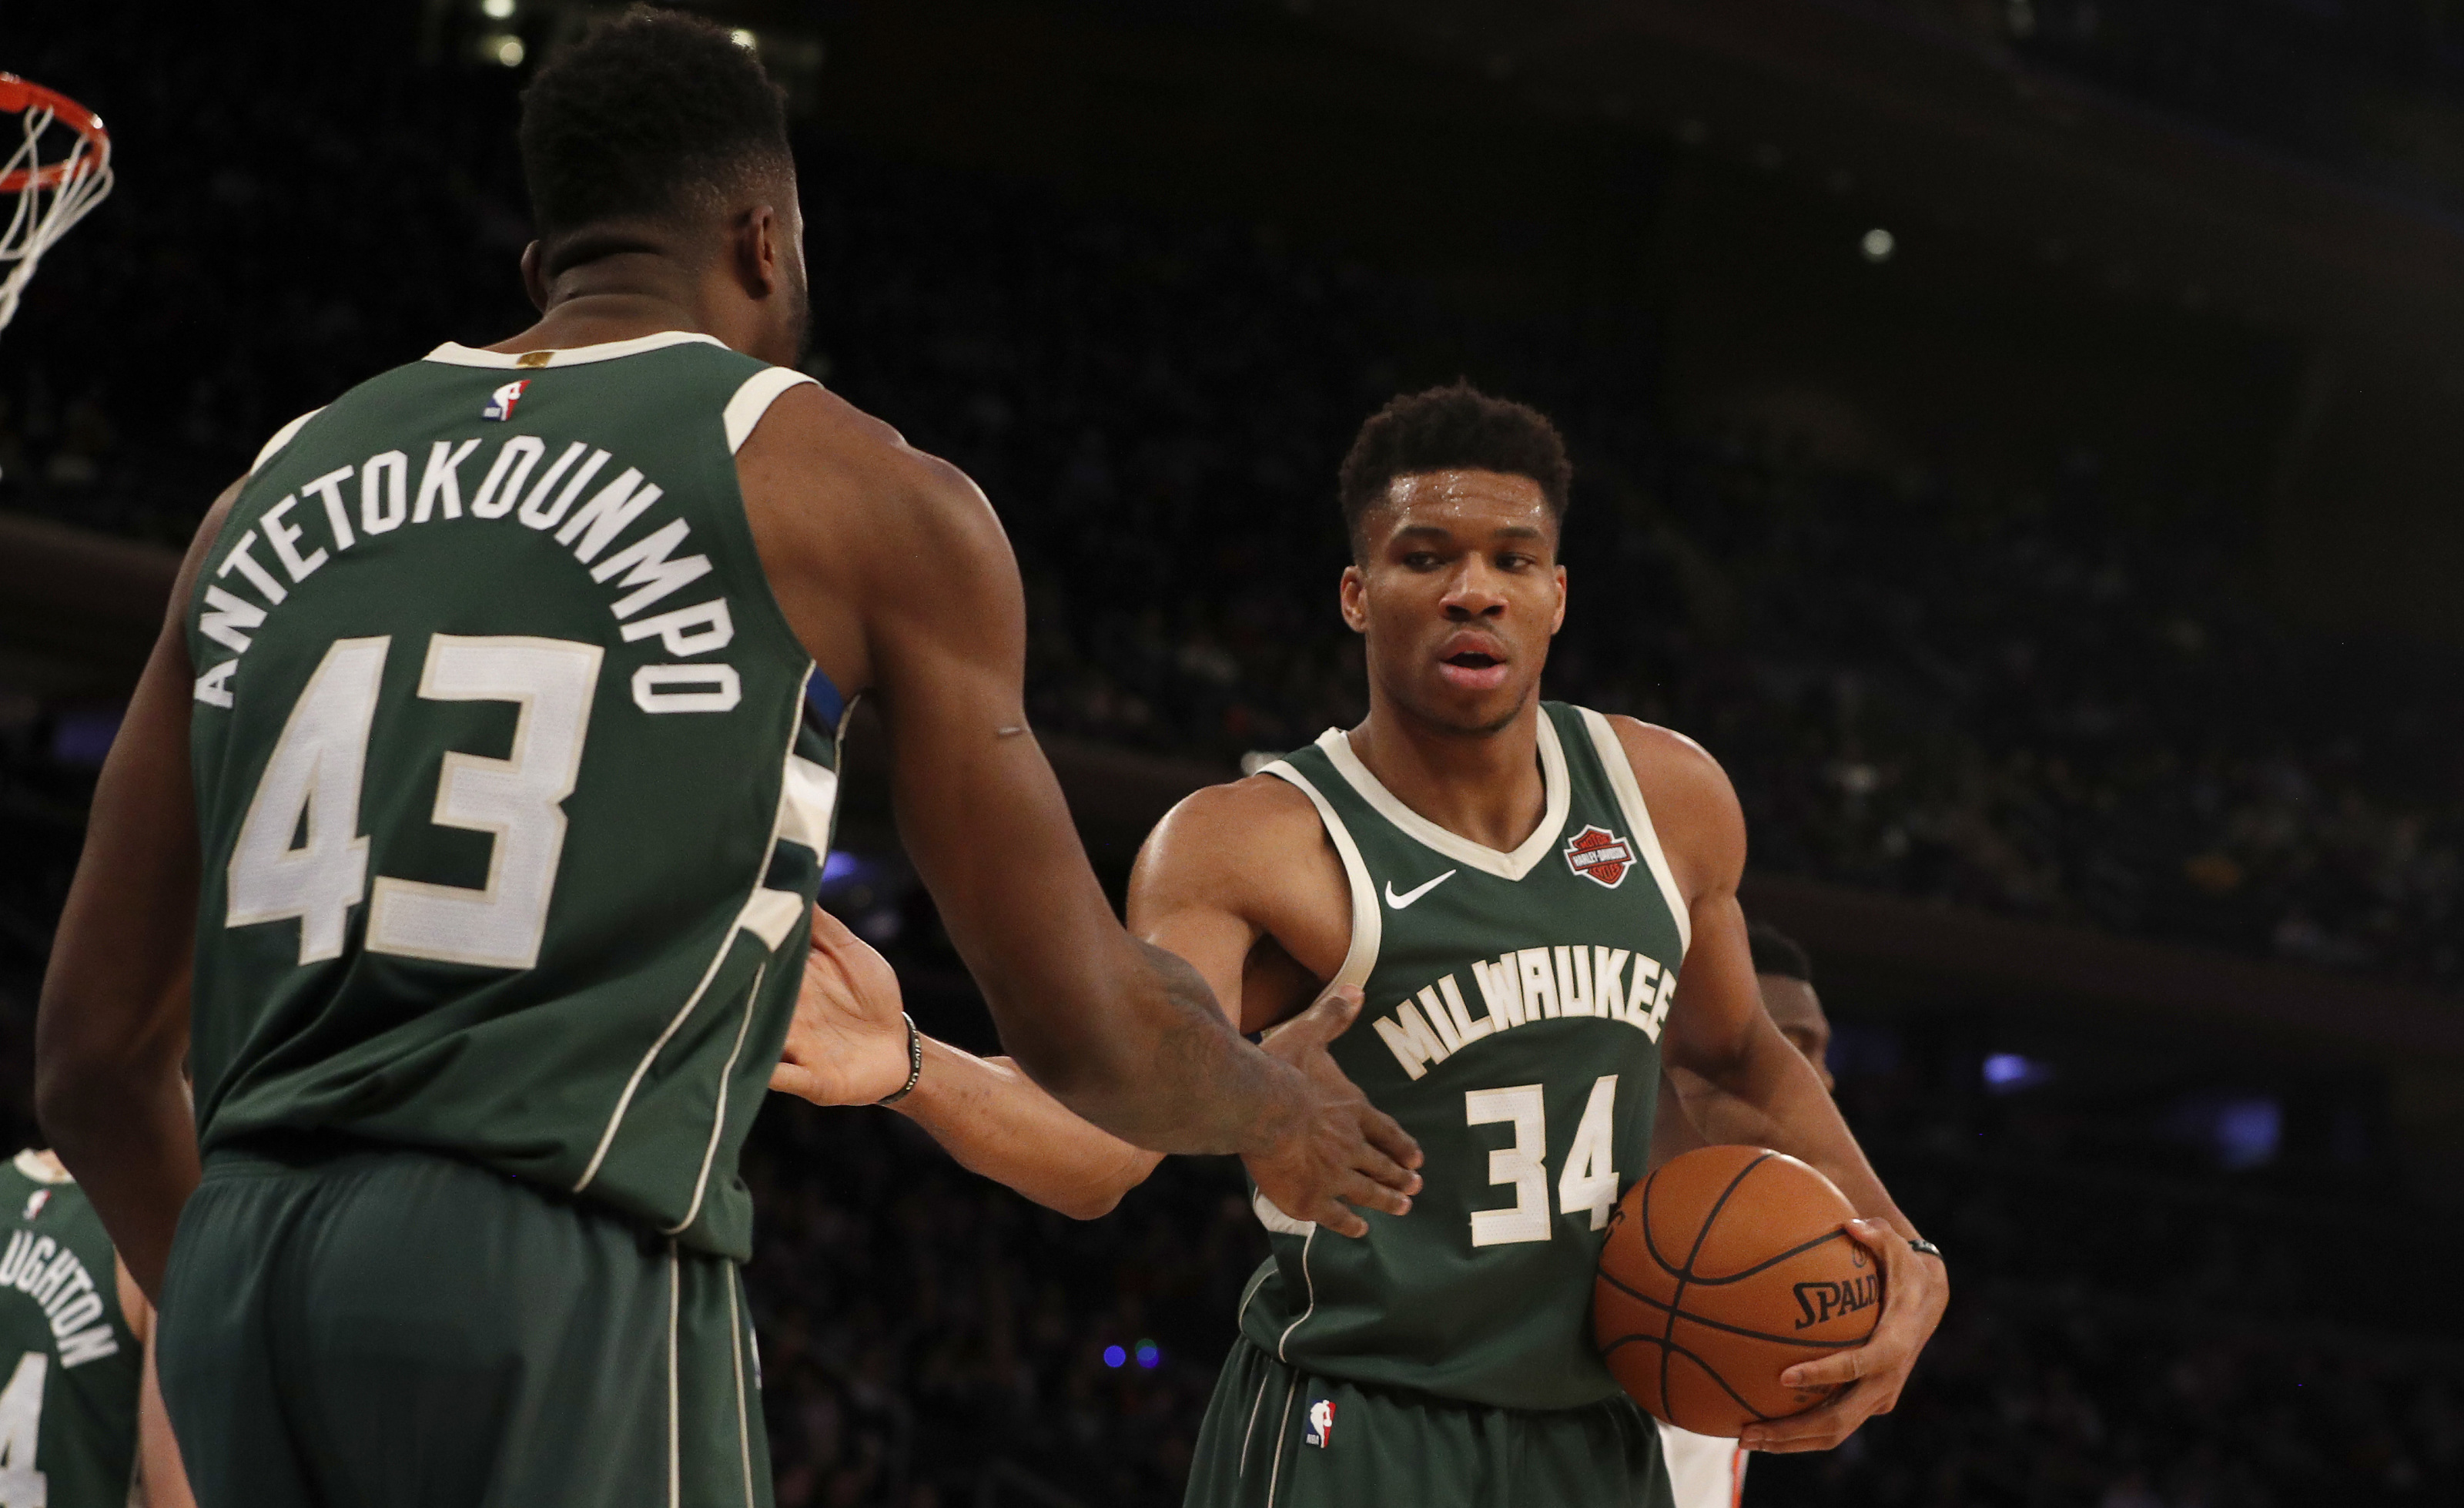 Why does Giannis Antetokounmpo wear number 34? Reason behind